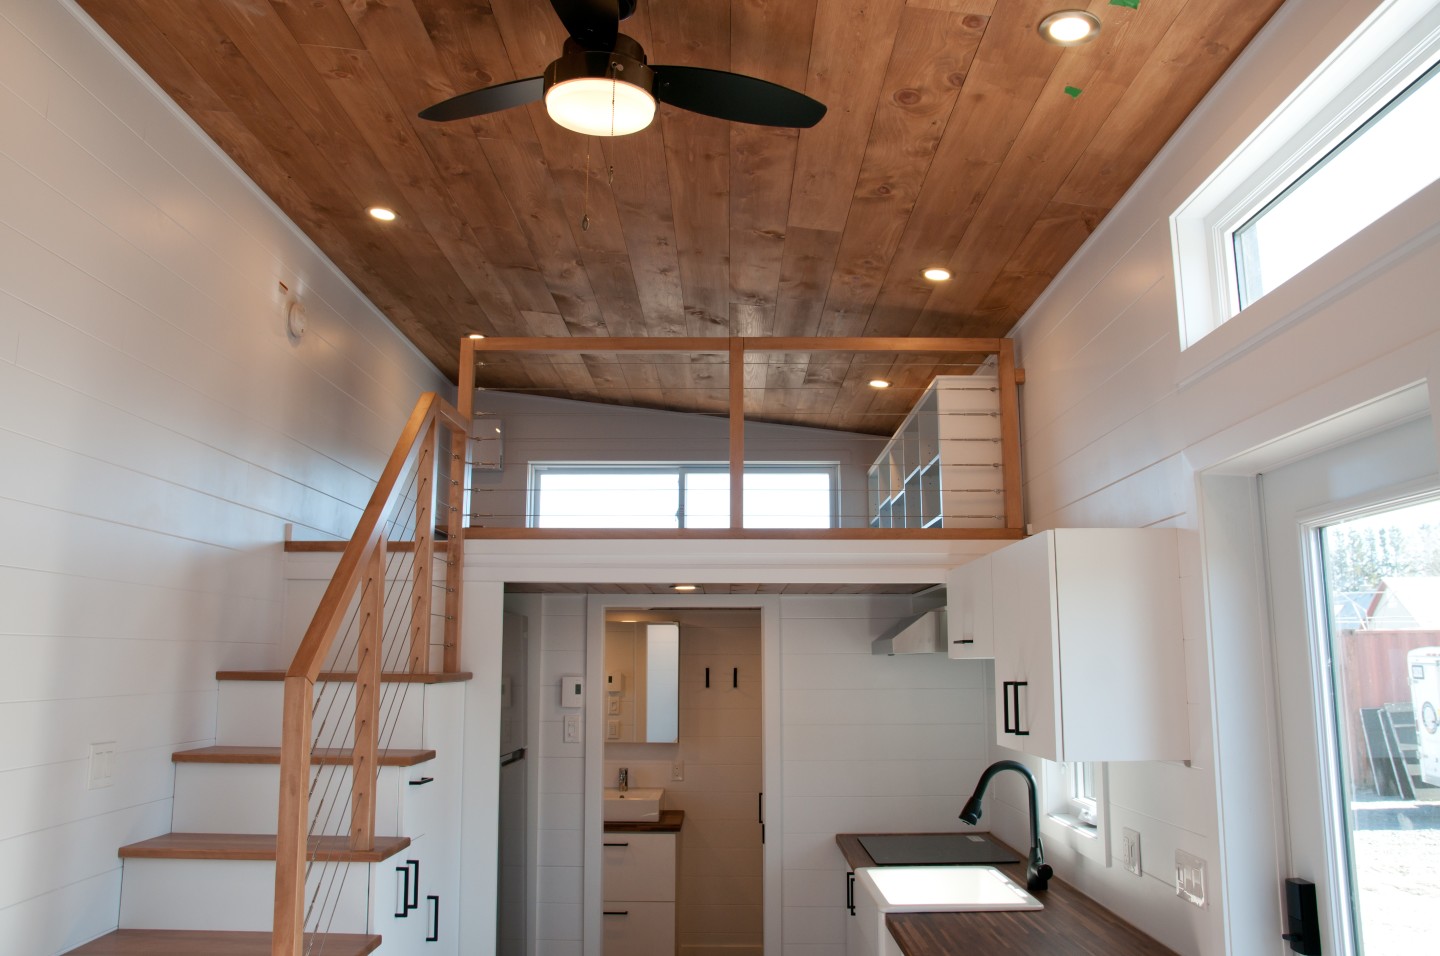 There's just one bedroom in the tiny house, which is a standard loft space with a low ceiling